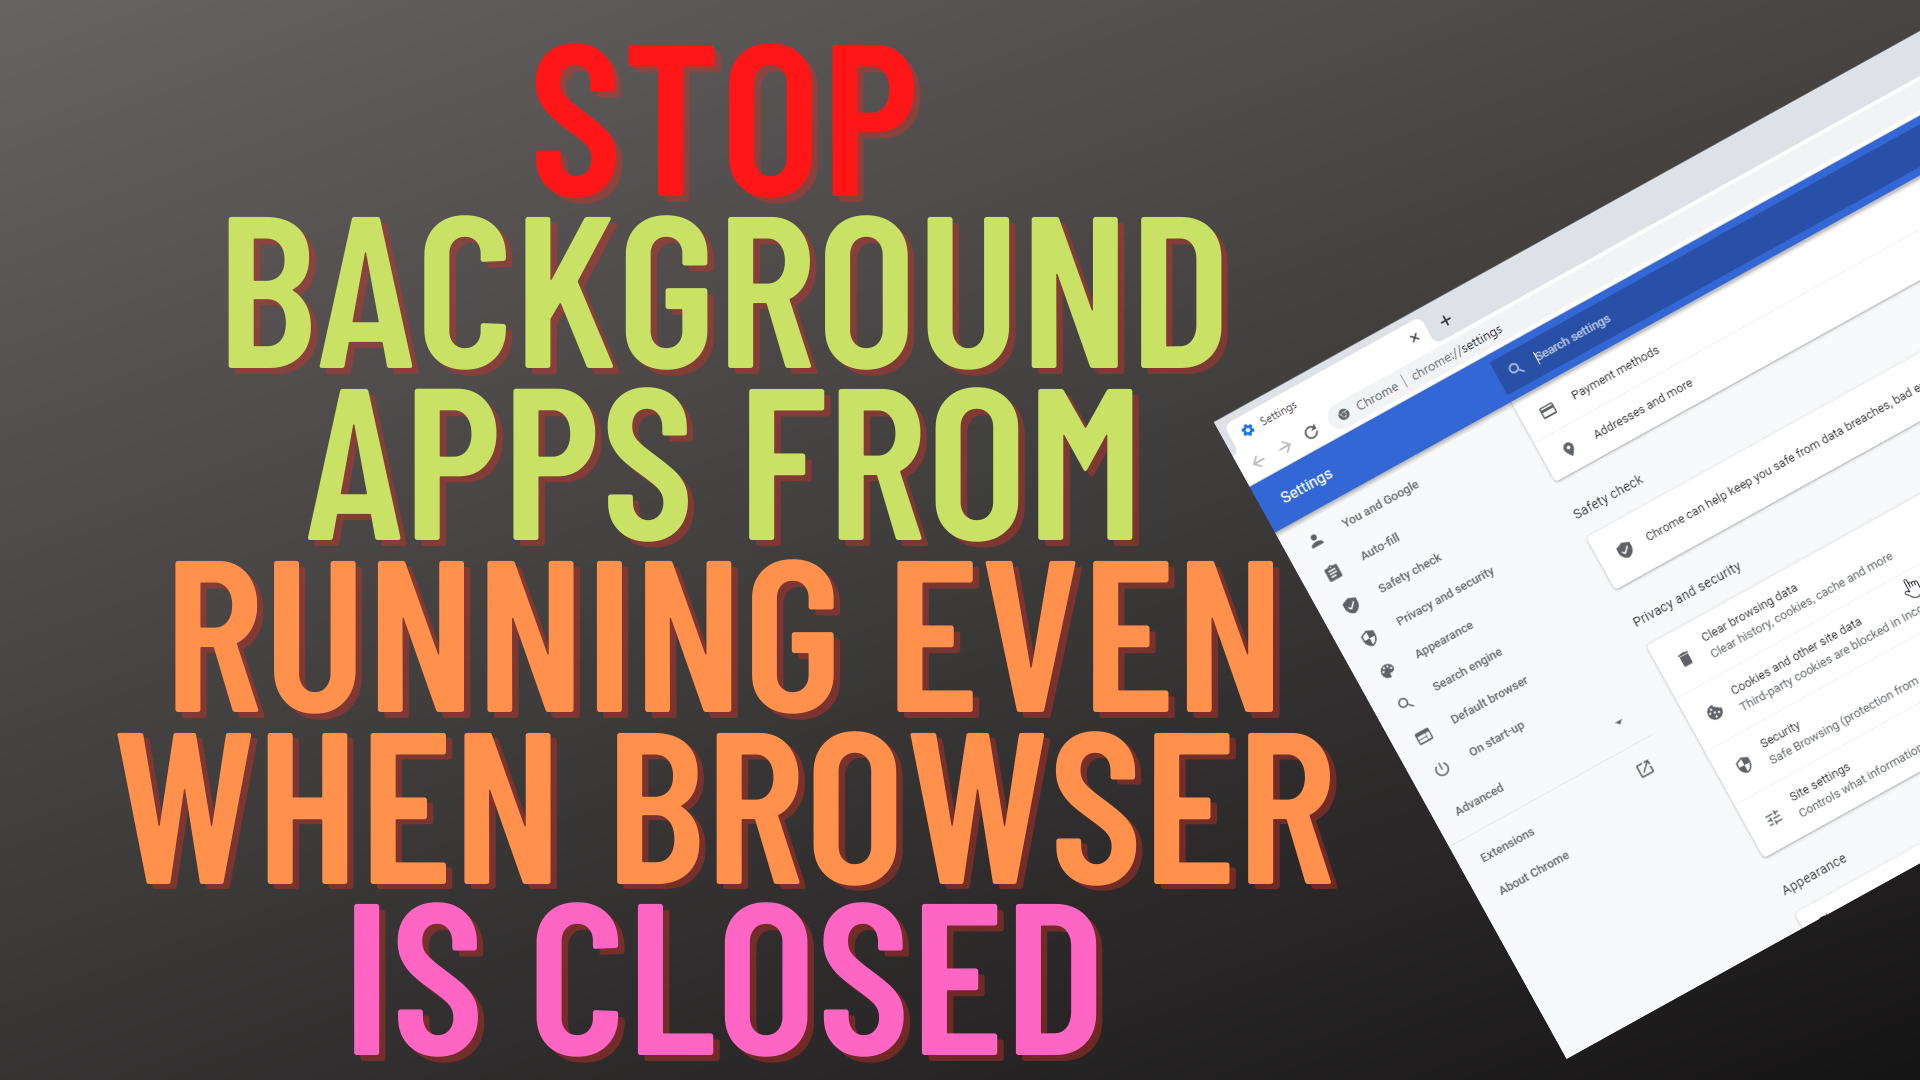 Stop Background Apps from Running Even When Browser Is Closed